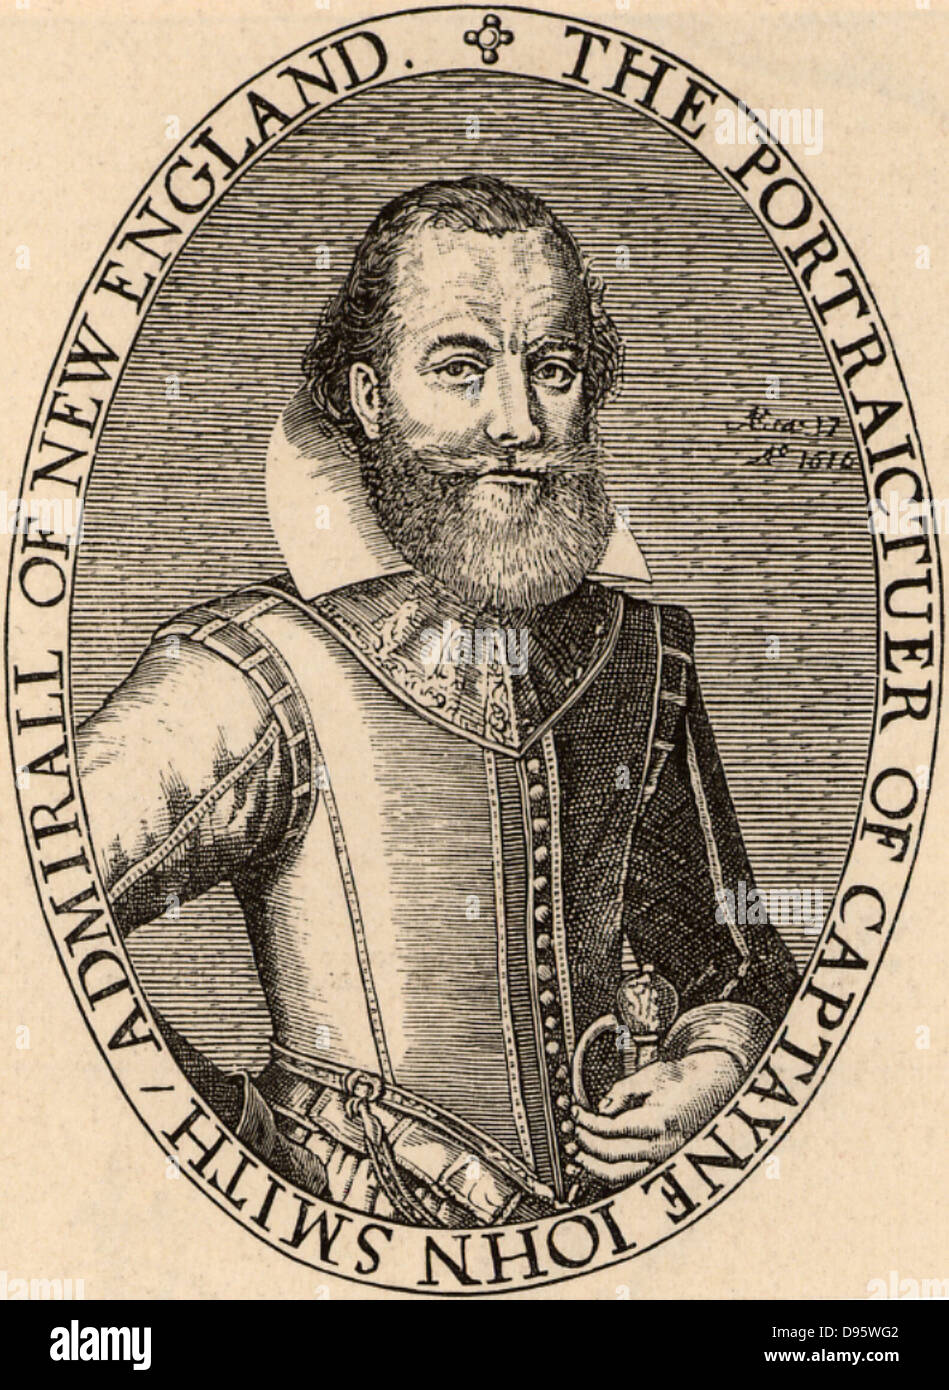 Old lithograph of captain John Smith (1580 – 1631), Admiral of New England  who was an English explorer. Founded Jamestown Stock Photo - Alamy